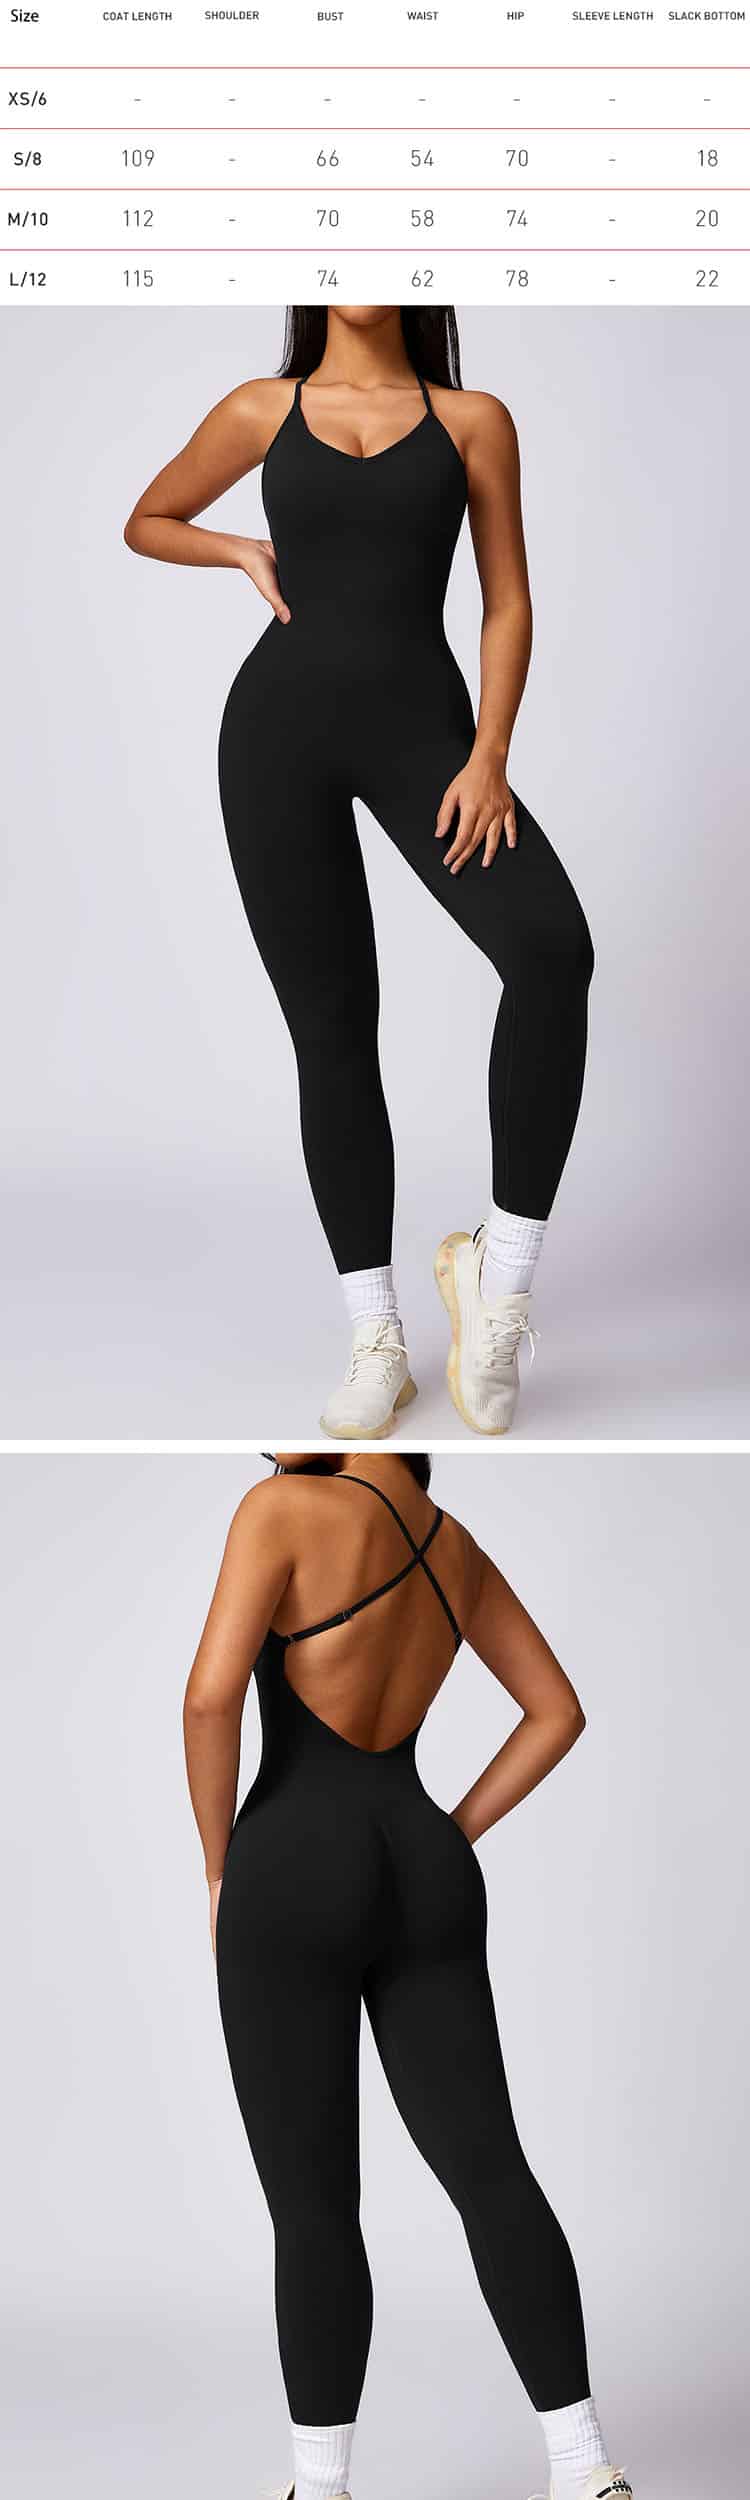 When it comes to comfort, nothing beats our stretchable